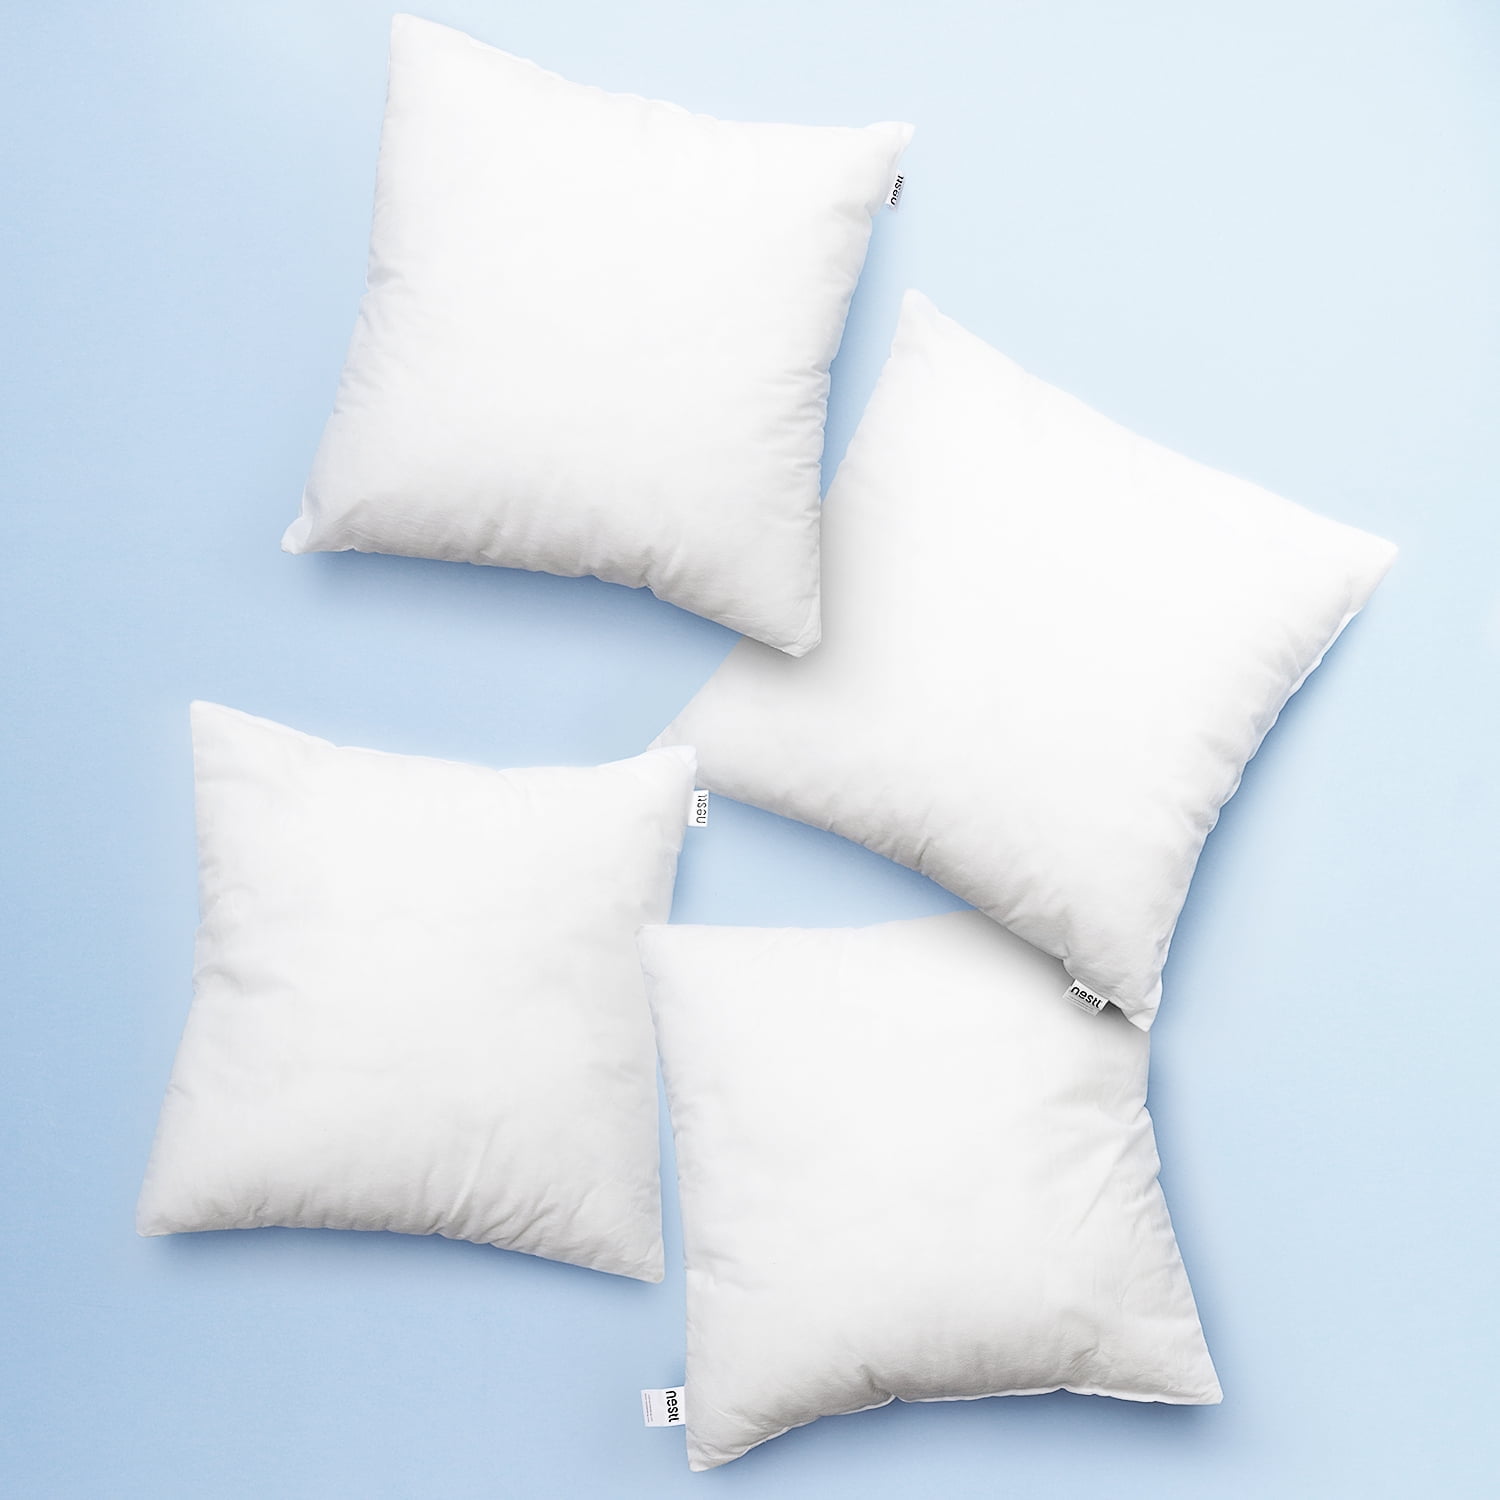 Square Pillow Forms